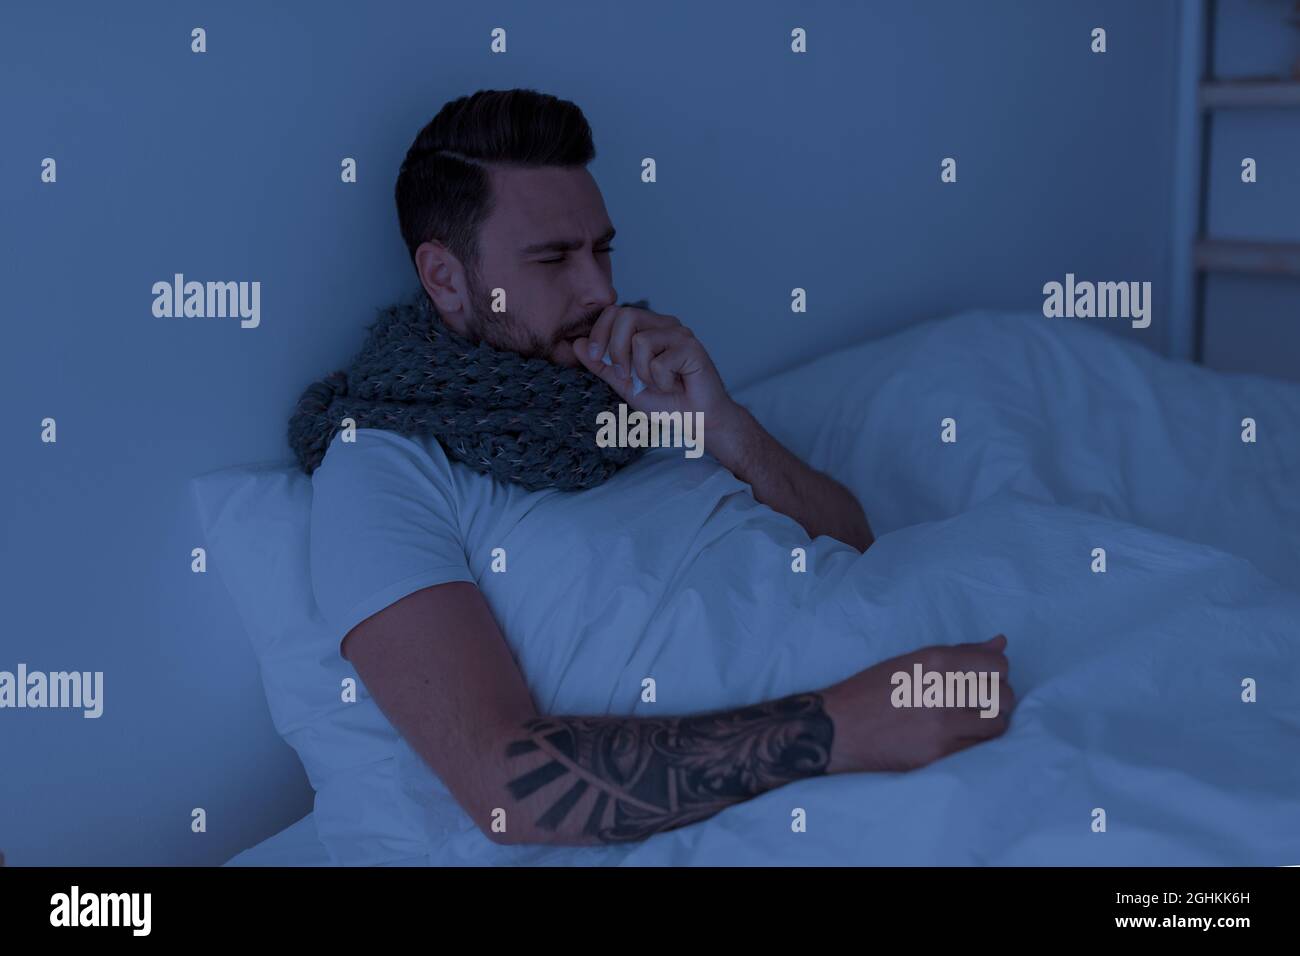 Coronavirus, influenza concept. Sick young man coughing, holding paper napkin near mouth, sitting in bed at night Stock Photo